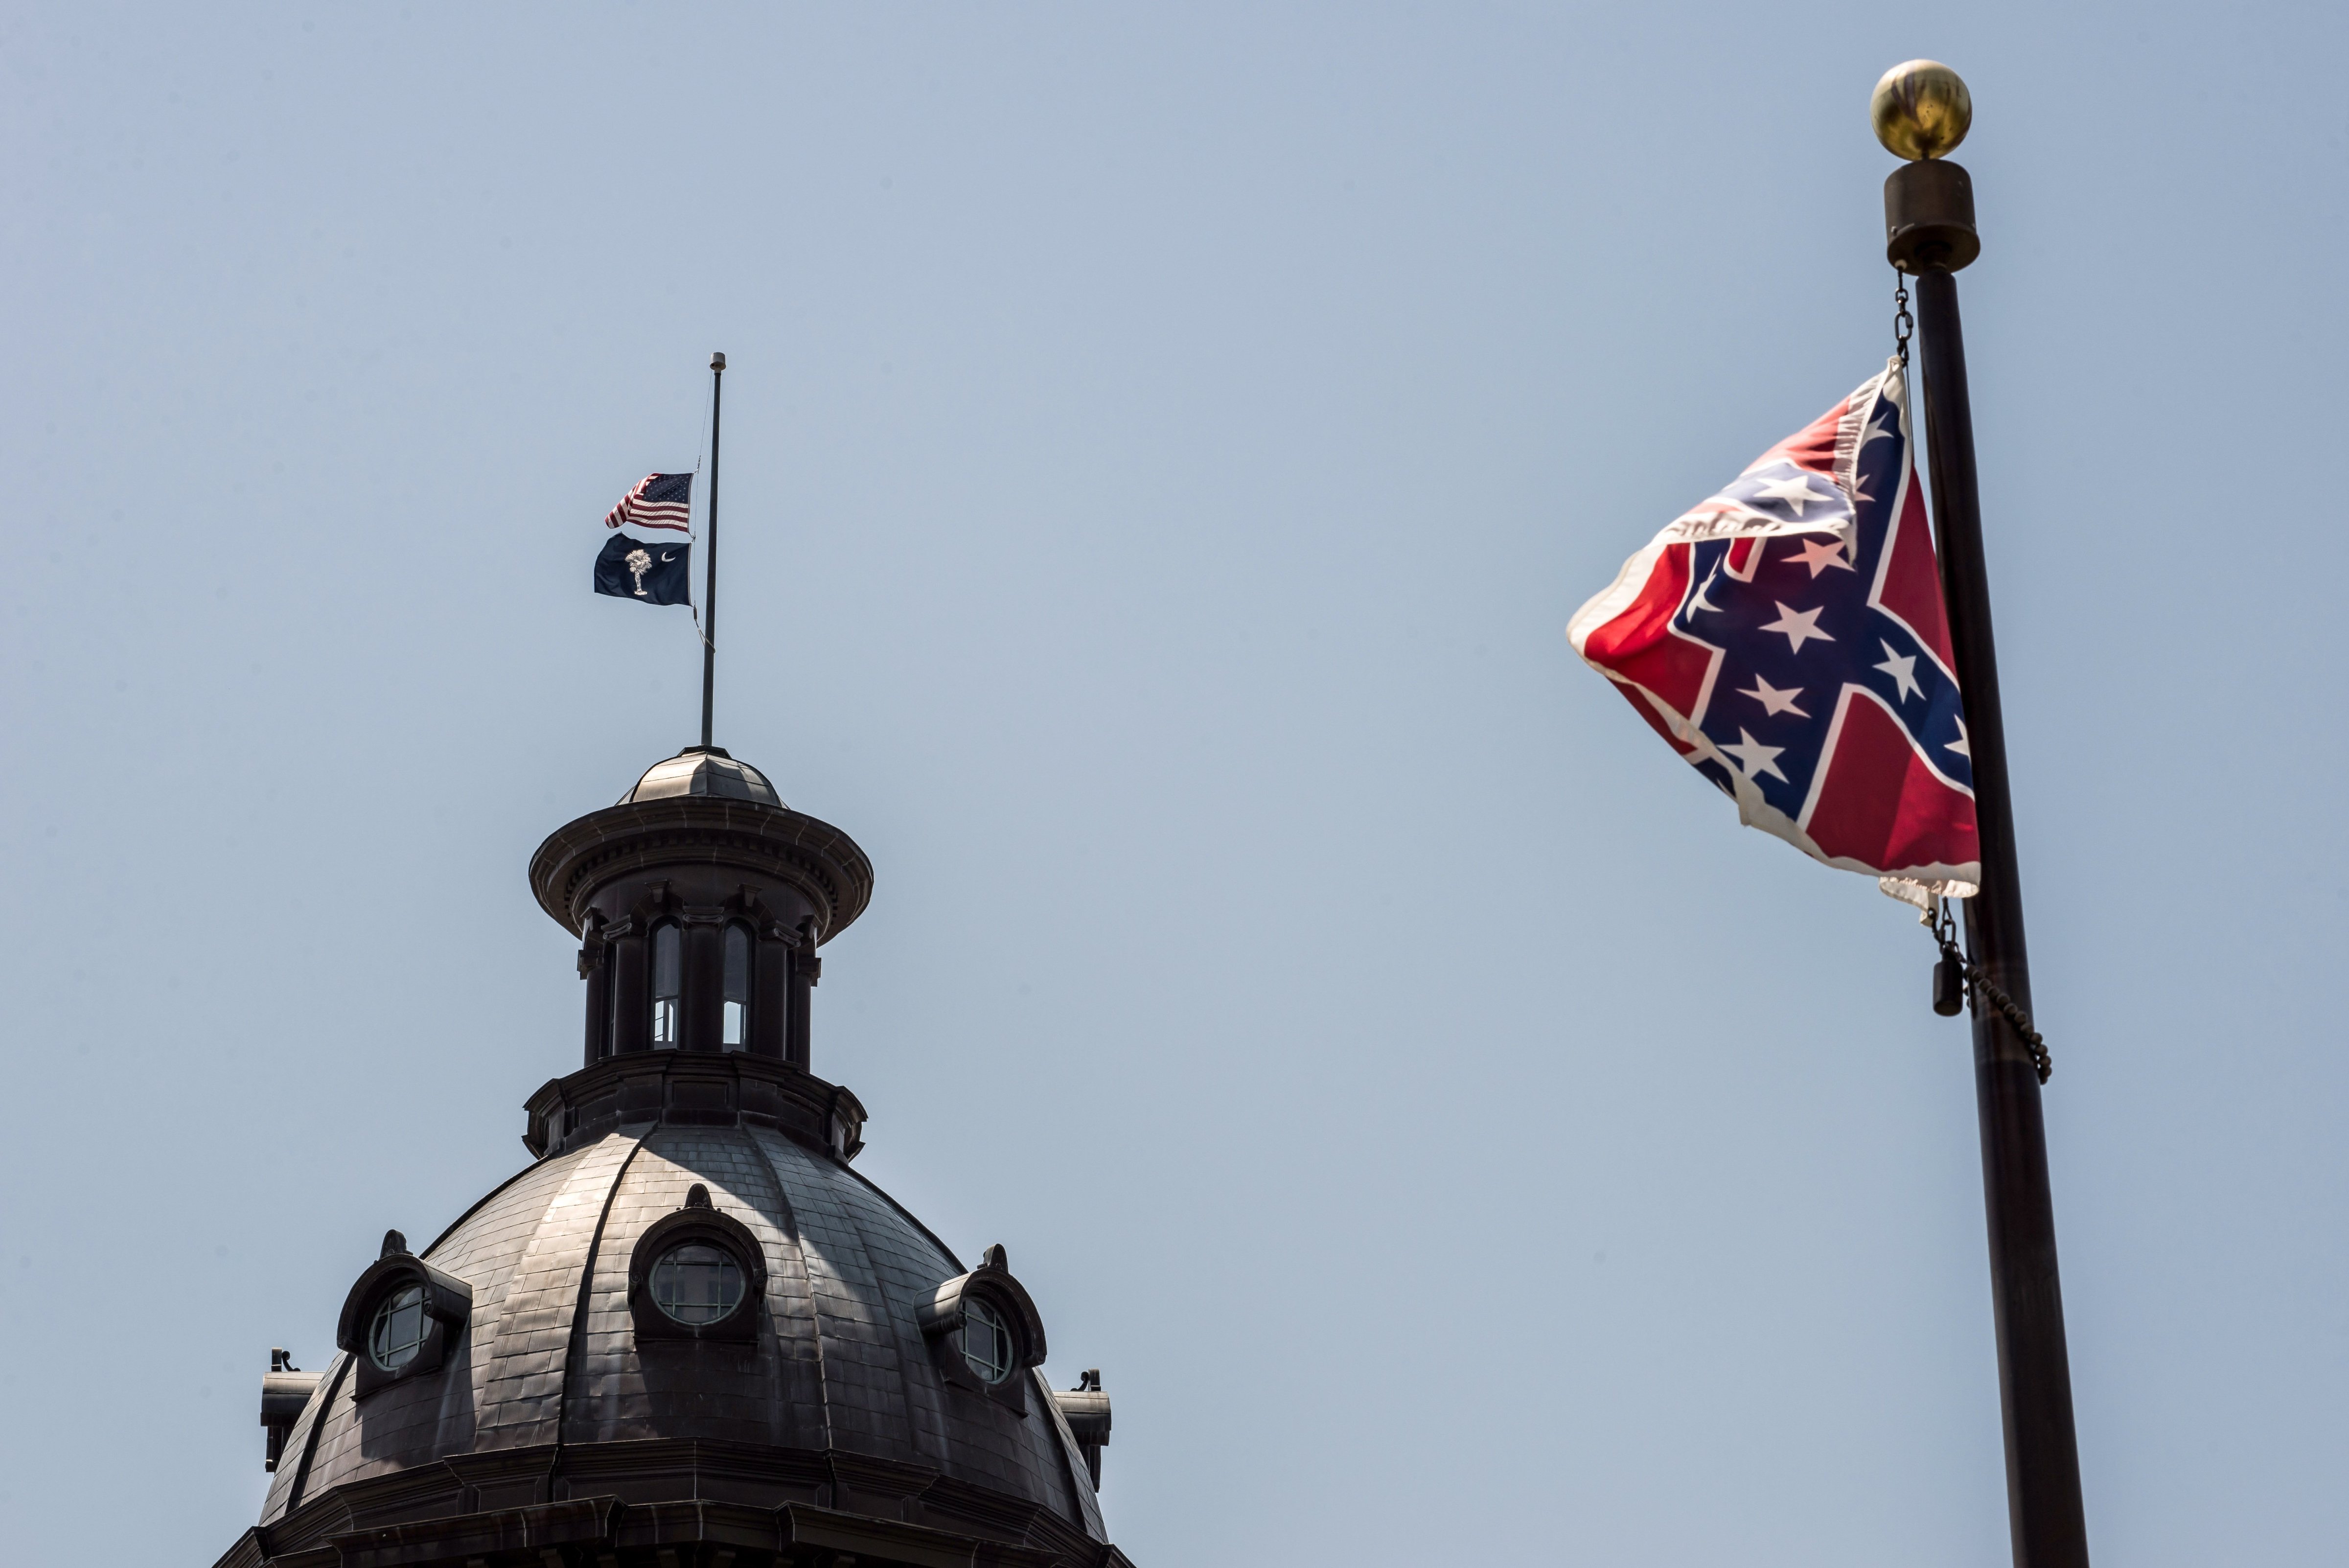 The South Carolina and American flags fly at half mast as the Confederate flag unfurls below at the Confederate Monument June 18, 2015 in Columbia, South Carolina. (Sean Rayford—Getty Images)